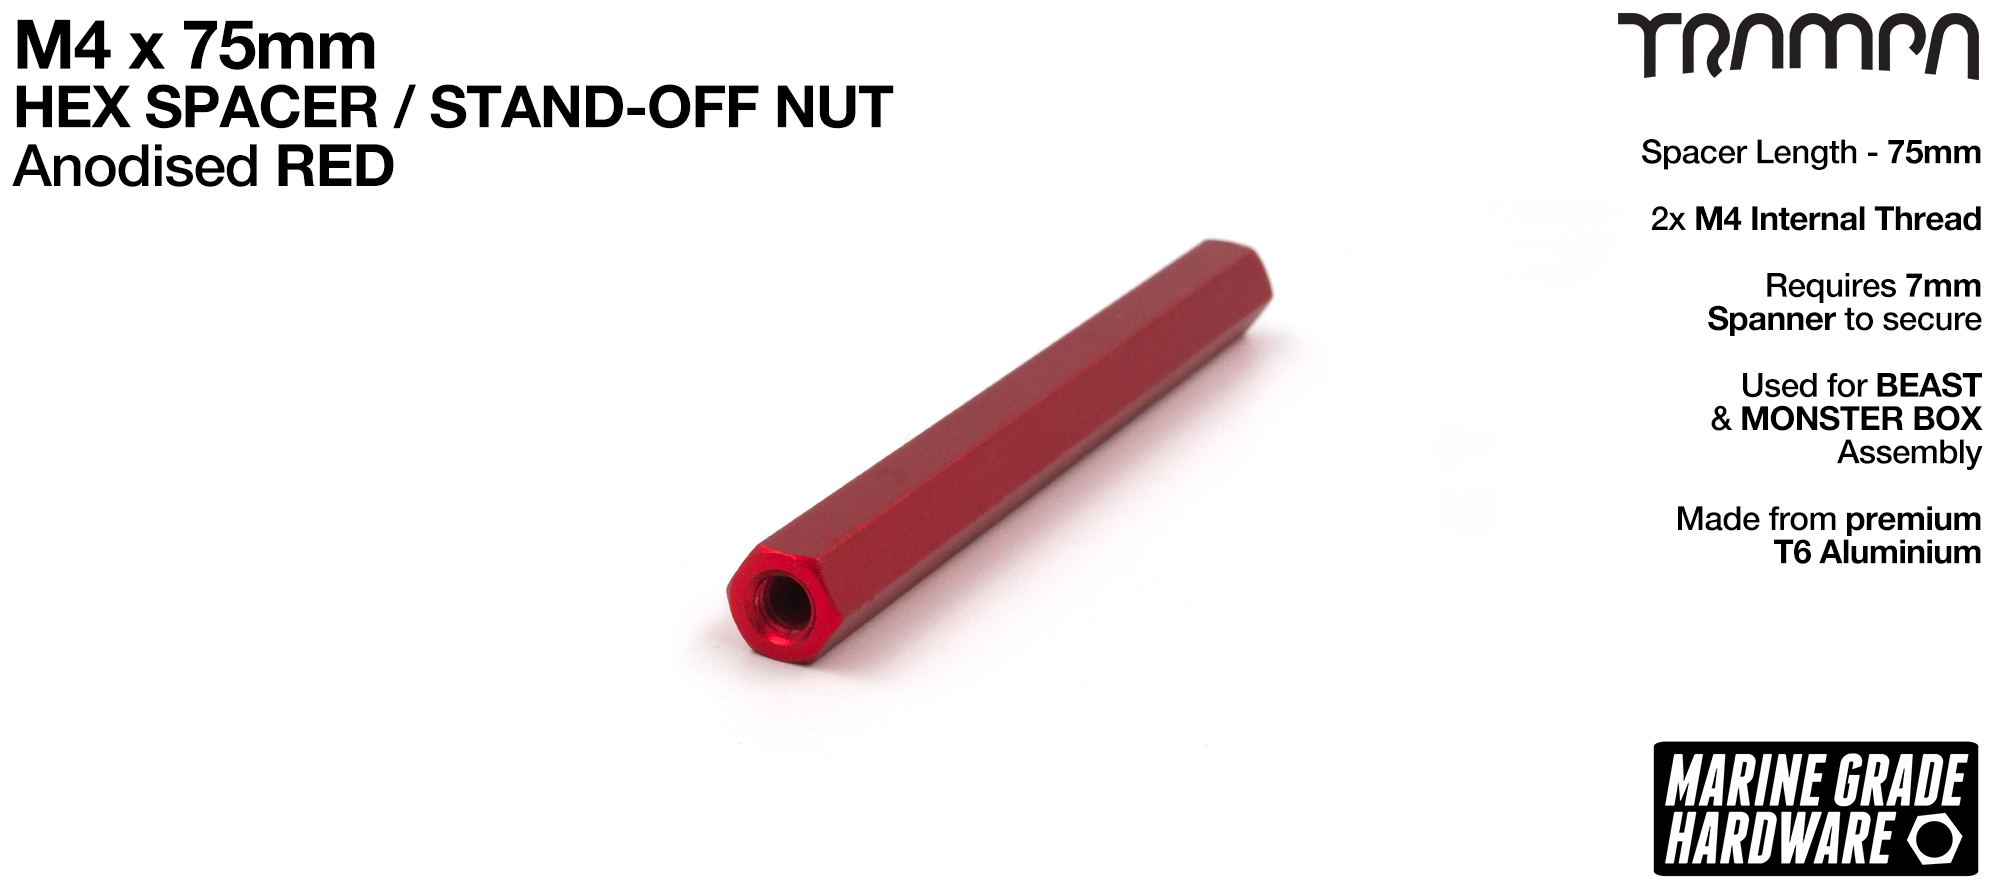 M4 x 75mm Aluminium Threaded HEX Spacer Nut used for assembling the MONSTER Battery Boxes - RED